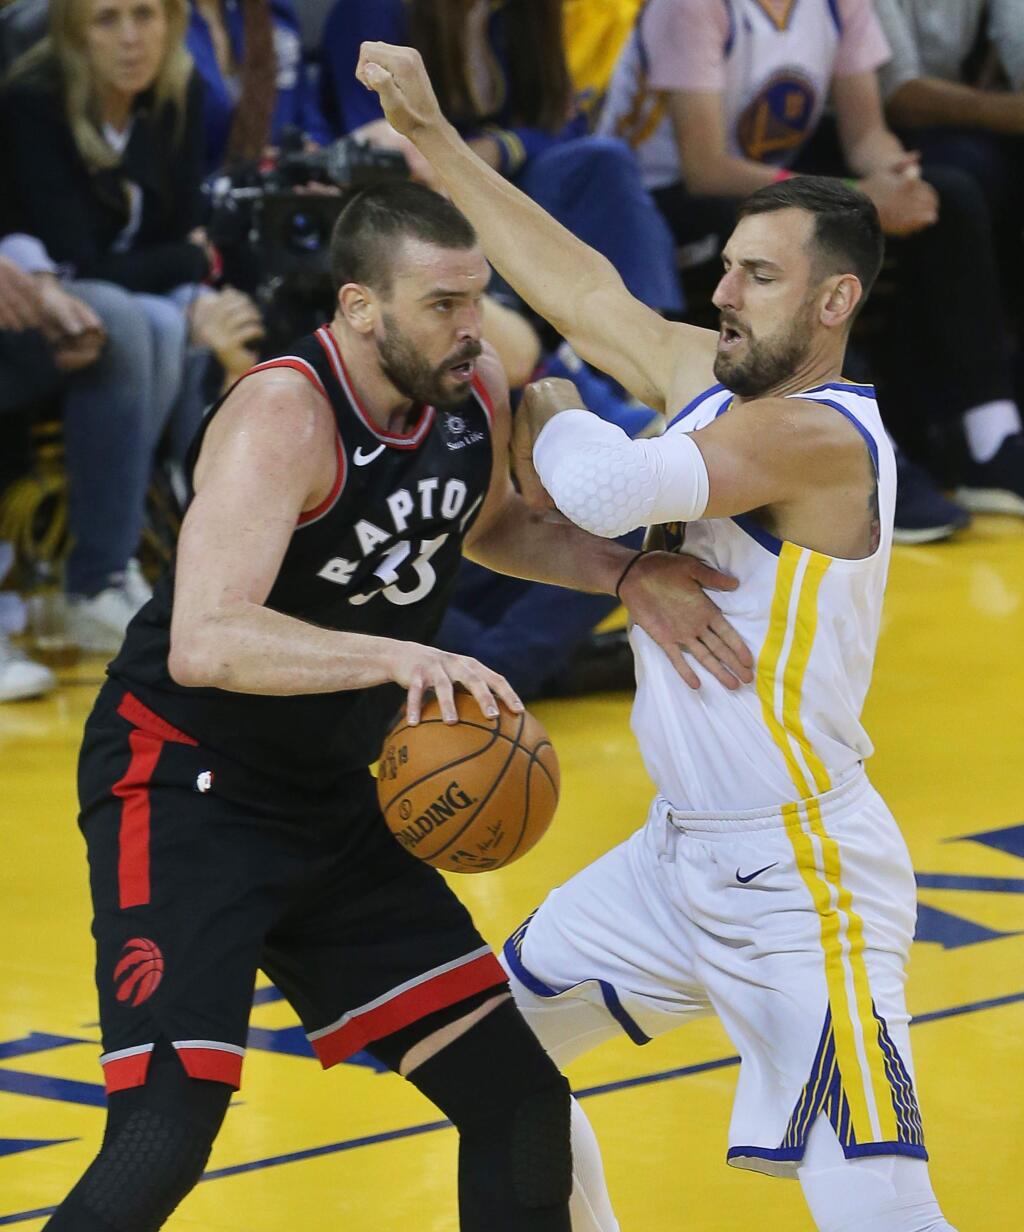 Golden State Warriors center Andrew Bogue defends against Toronto Raptors center Marc Gasol during game 3 of the NBA Finals in Oakland on Wednesday, June 5, 2019. (Christopher Chung/ The Press Democrat)